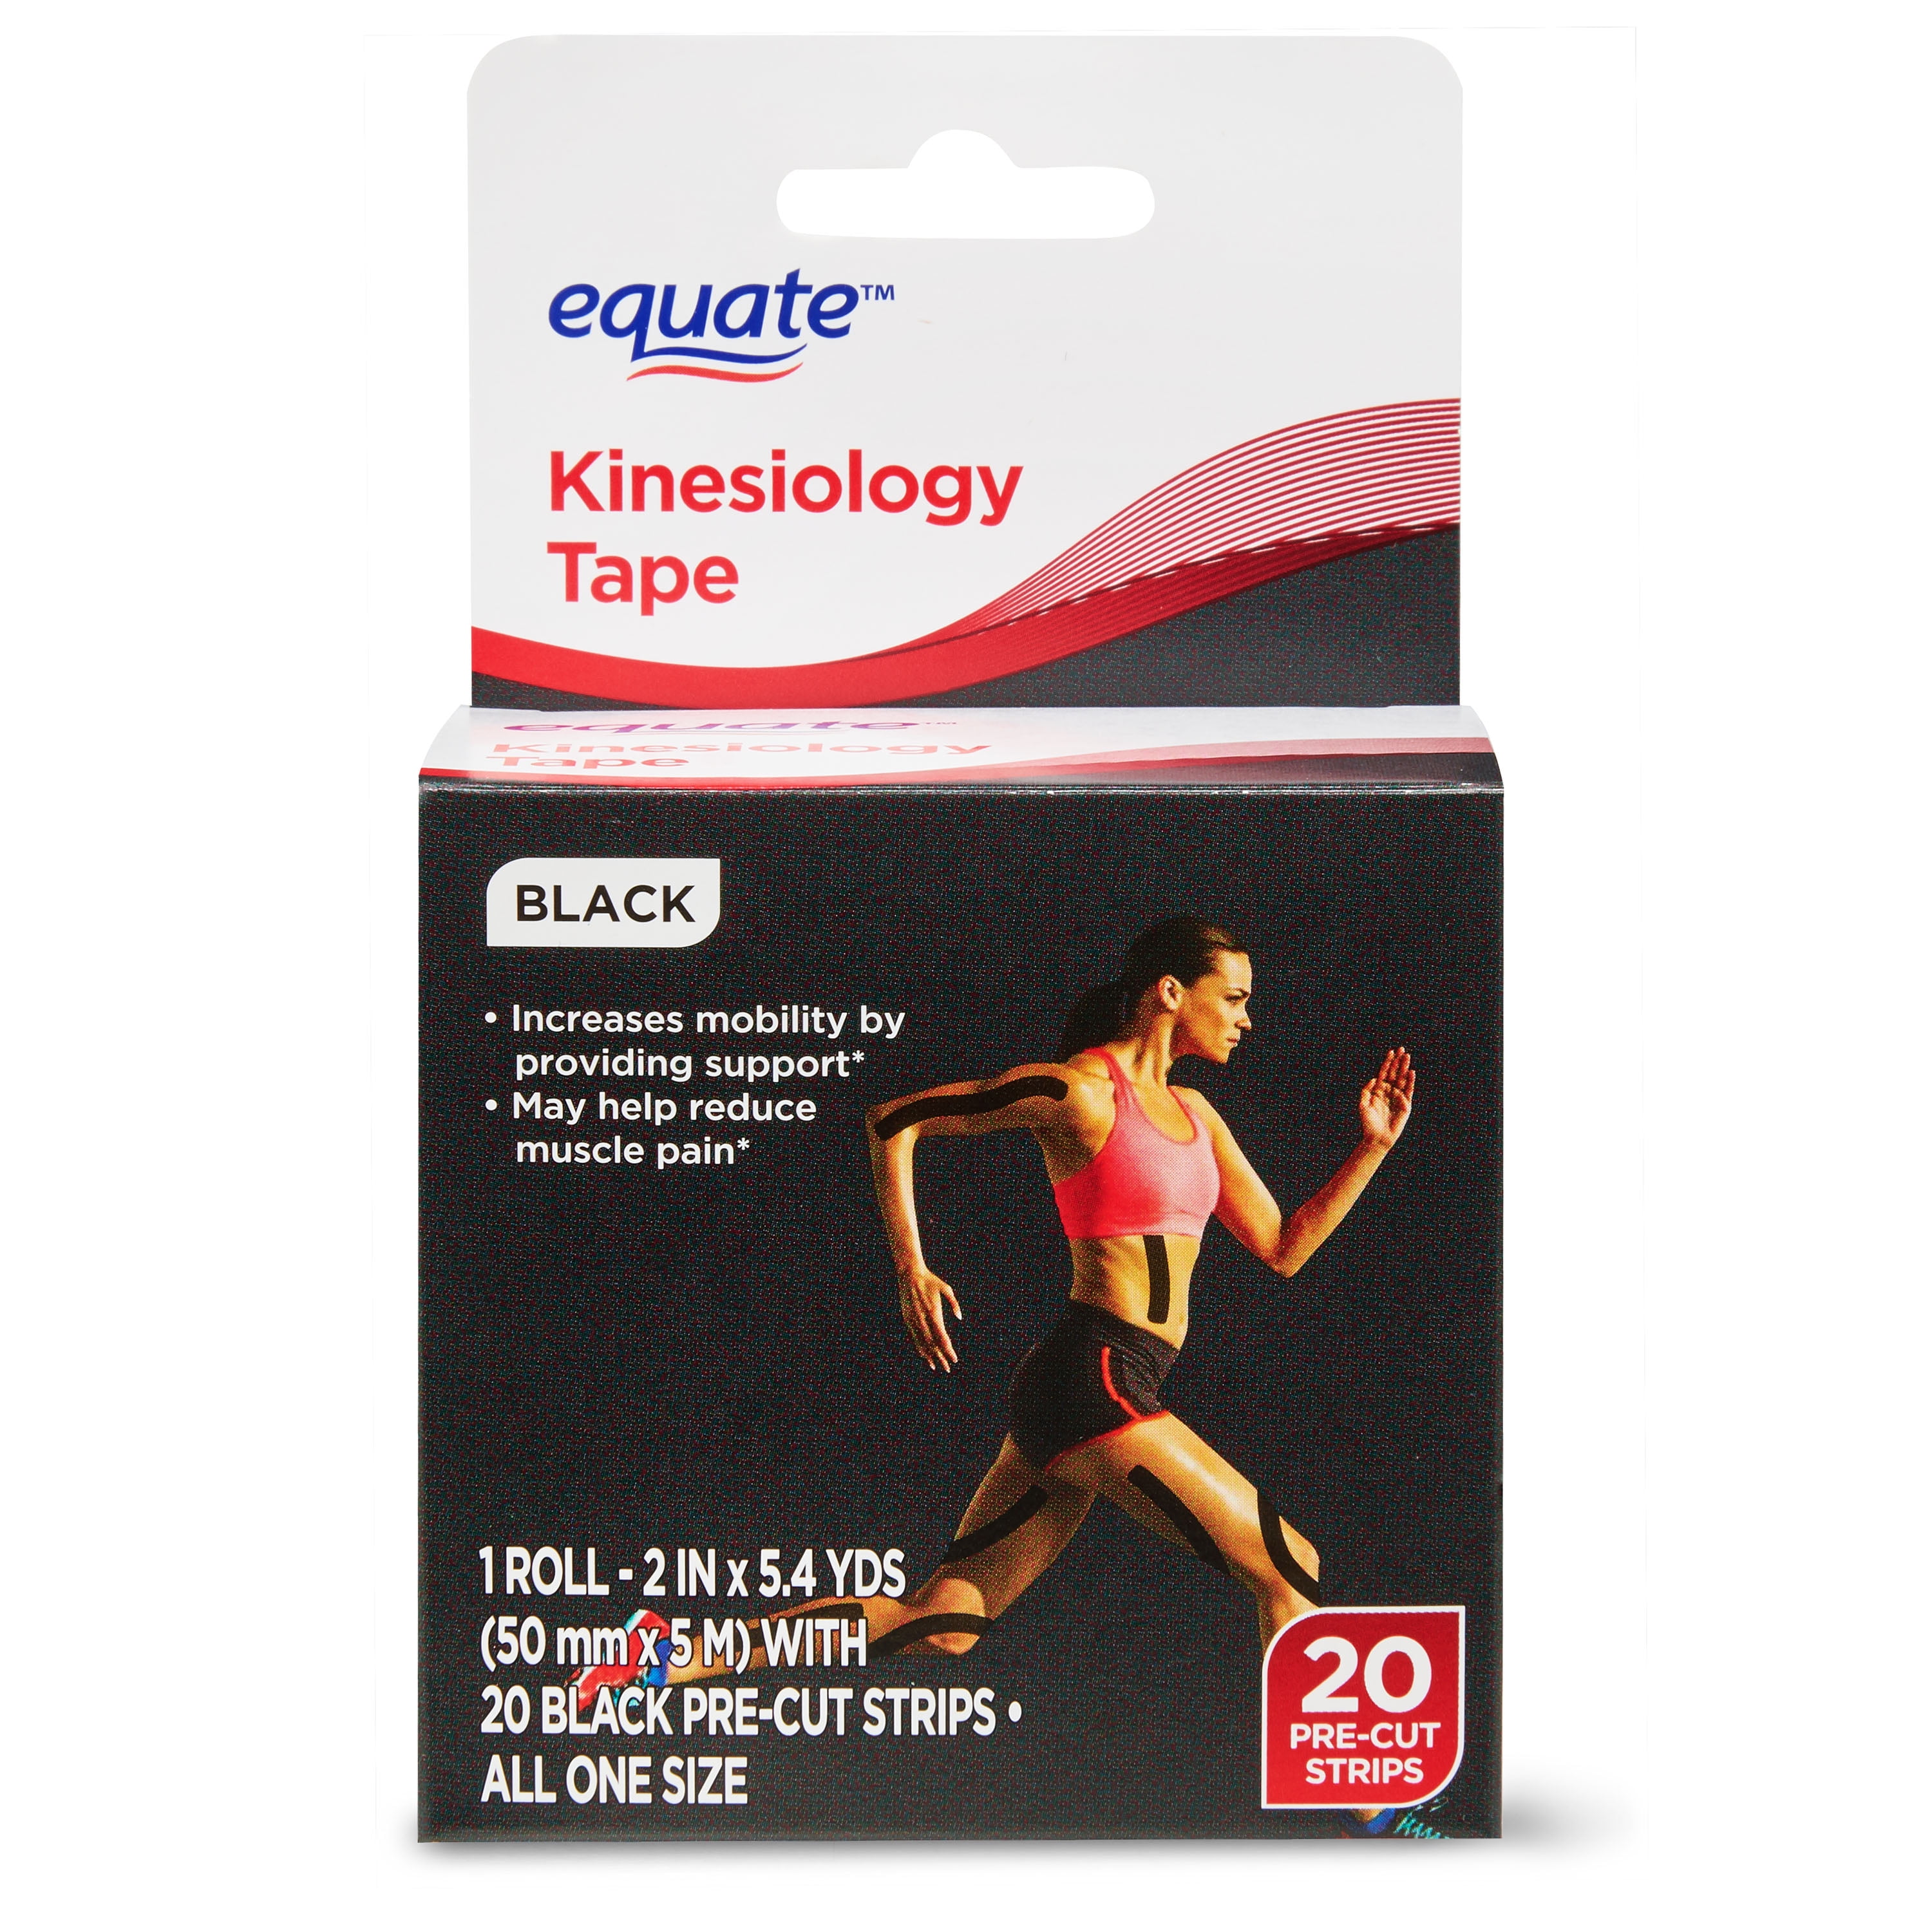 2 pack Kinesiology Tape Boost Athletic Performance Reduce Muscle Pain 